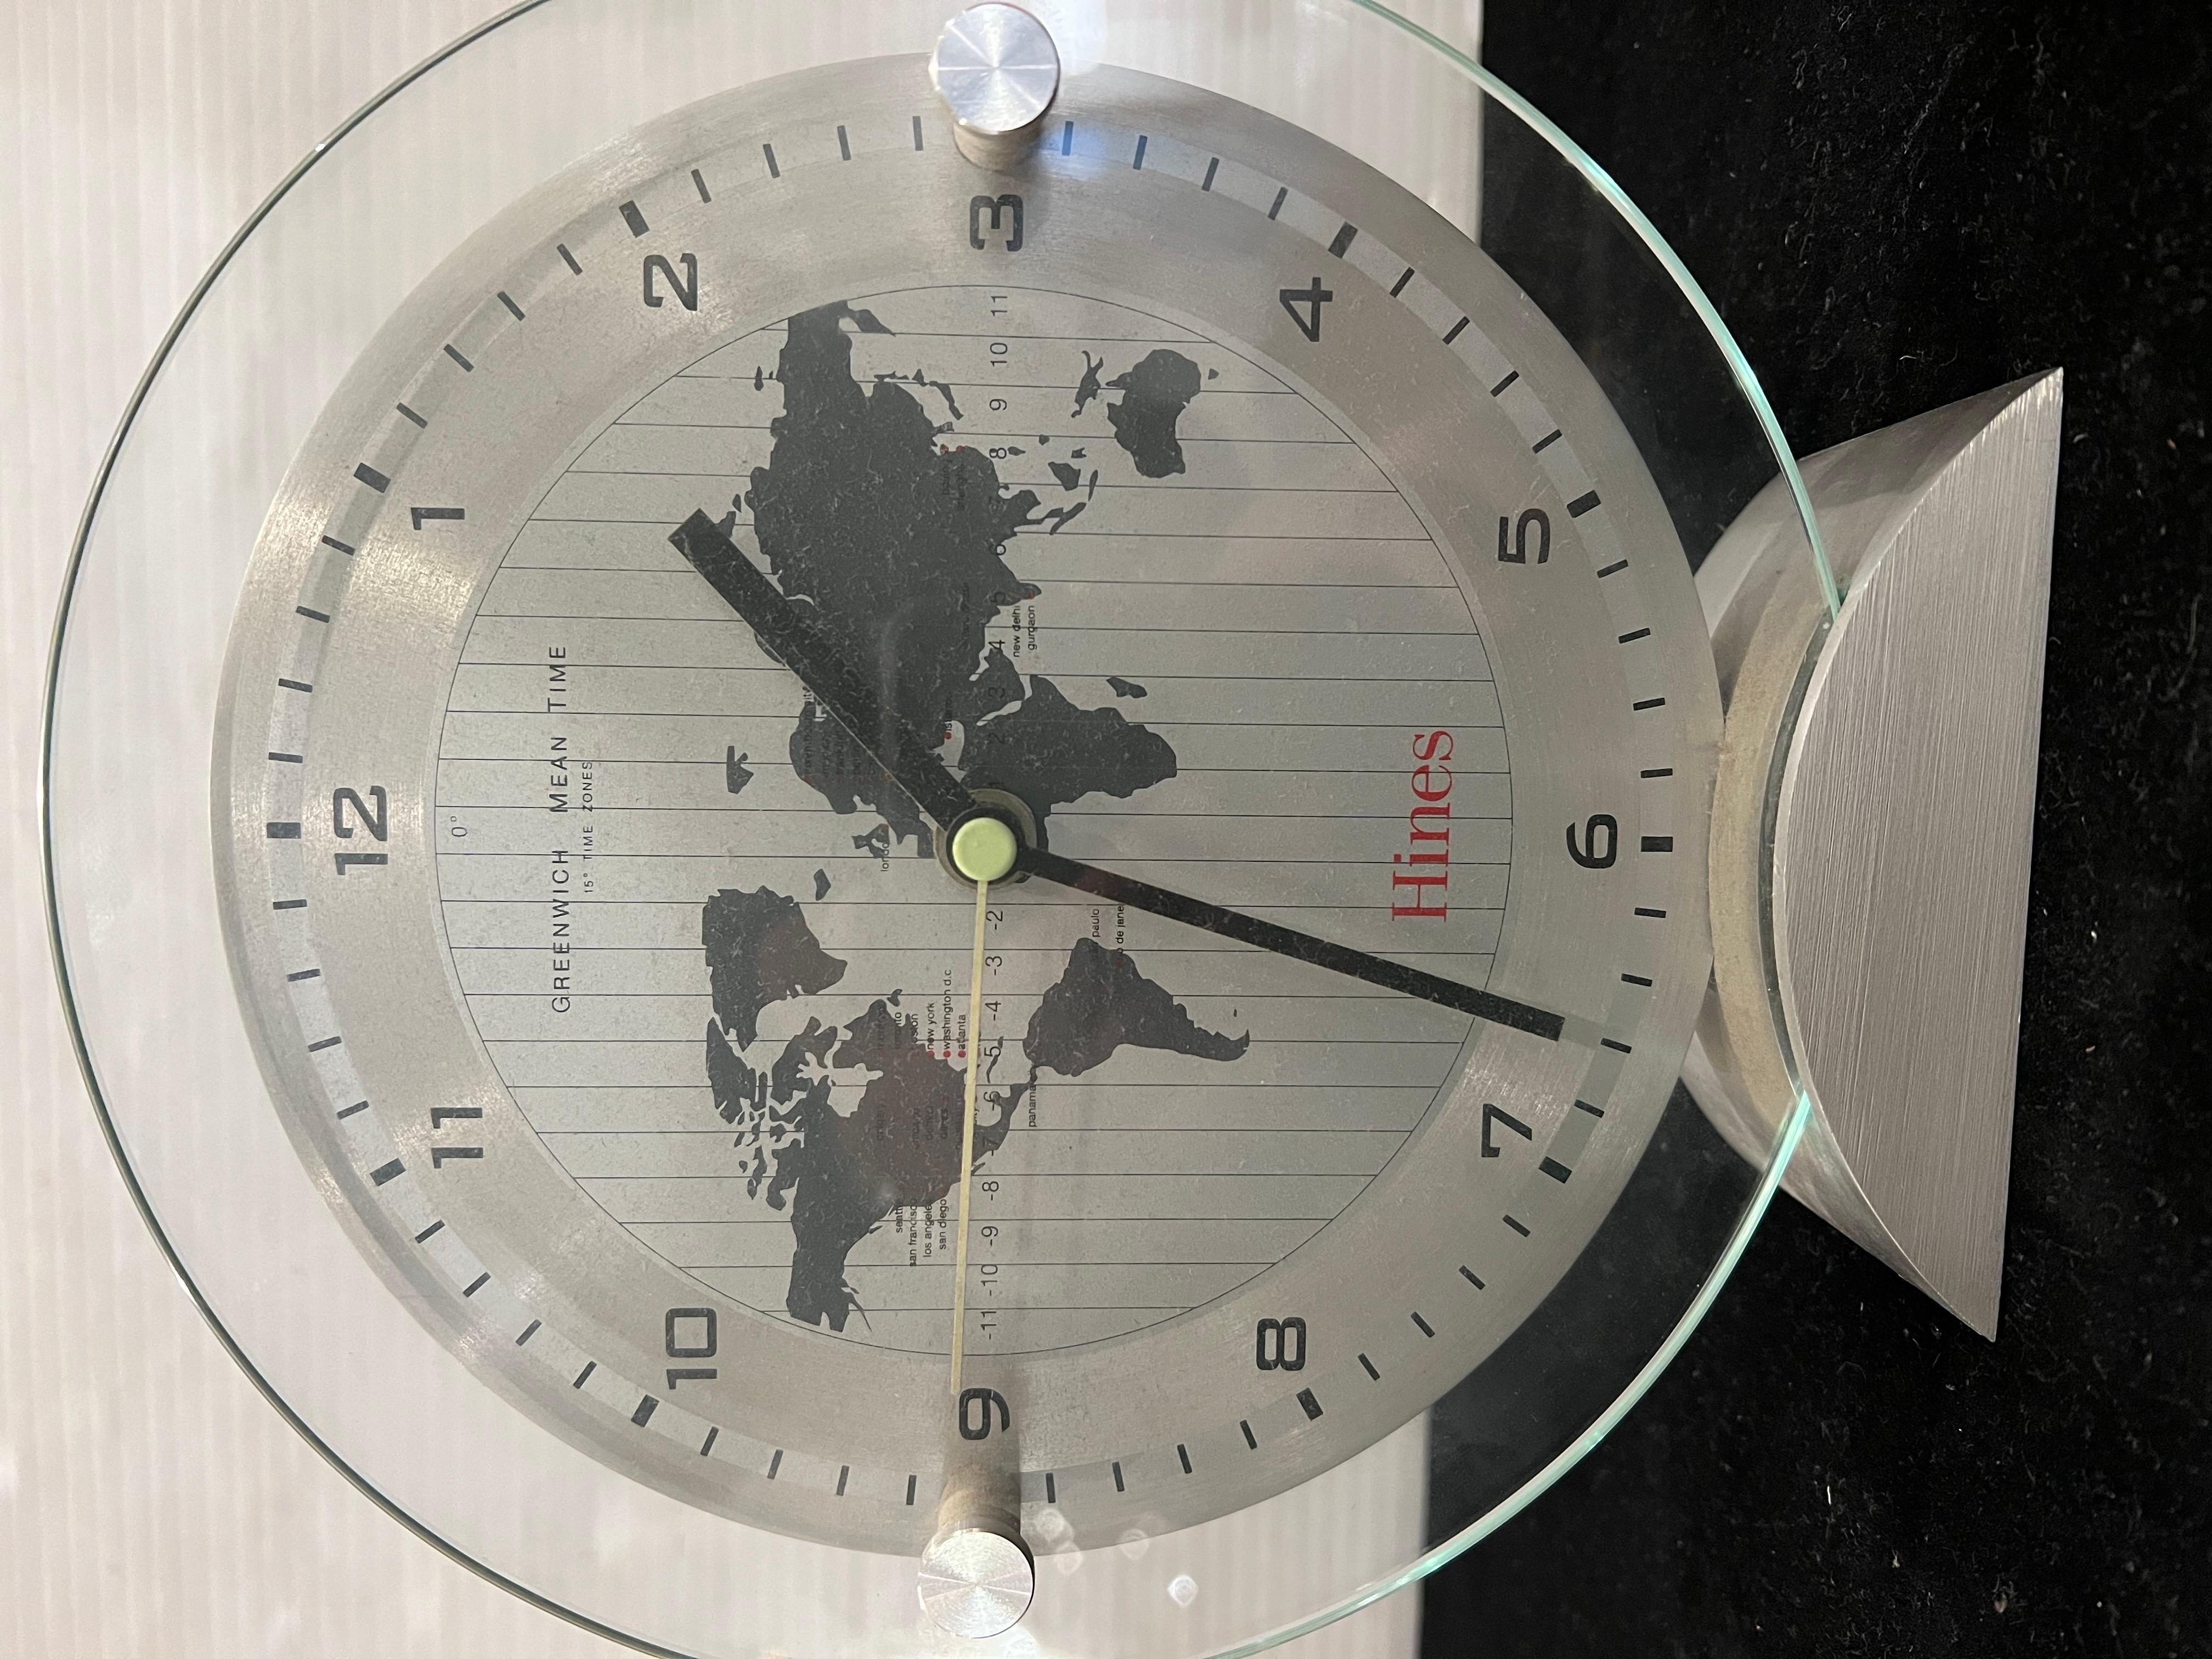 20th Century American Post Modern World Desk Table Clock Meridian Greenwich Mean Time